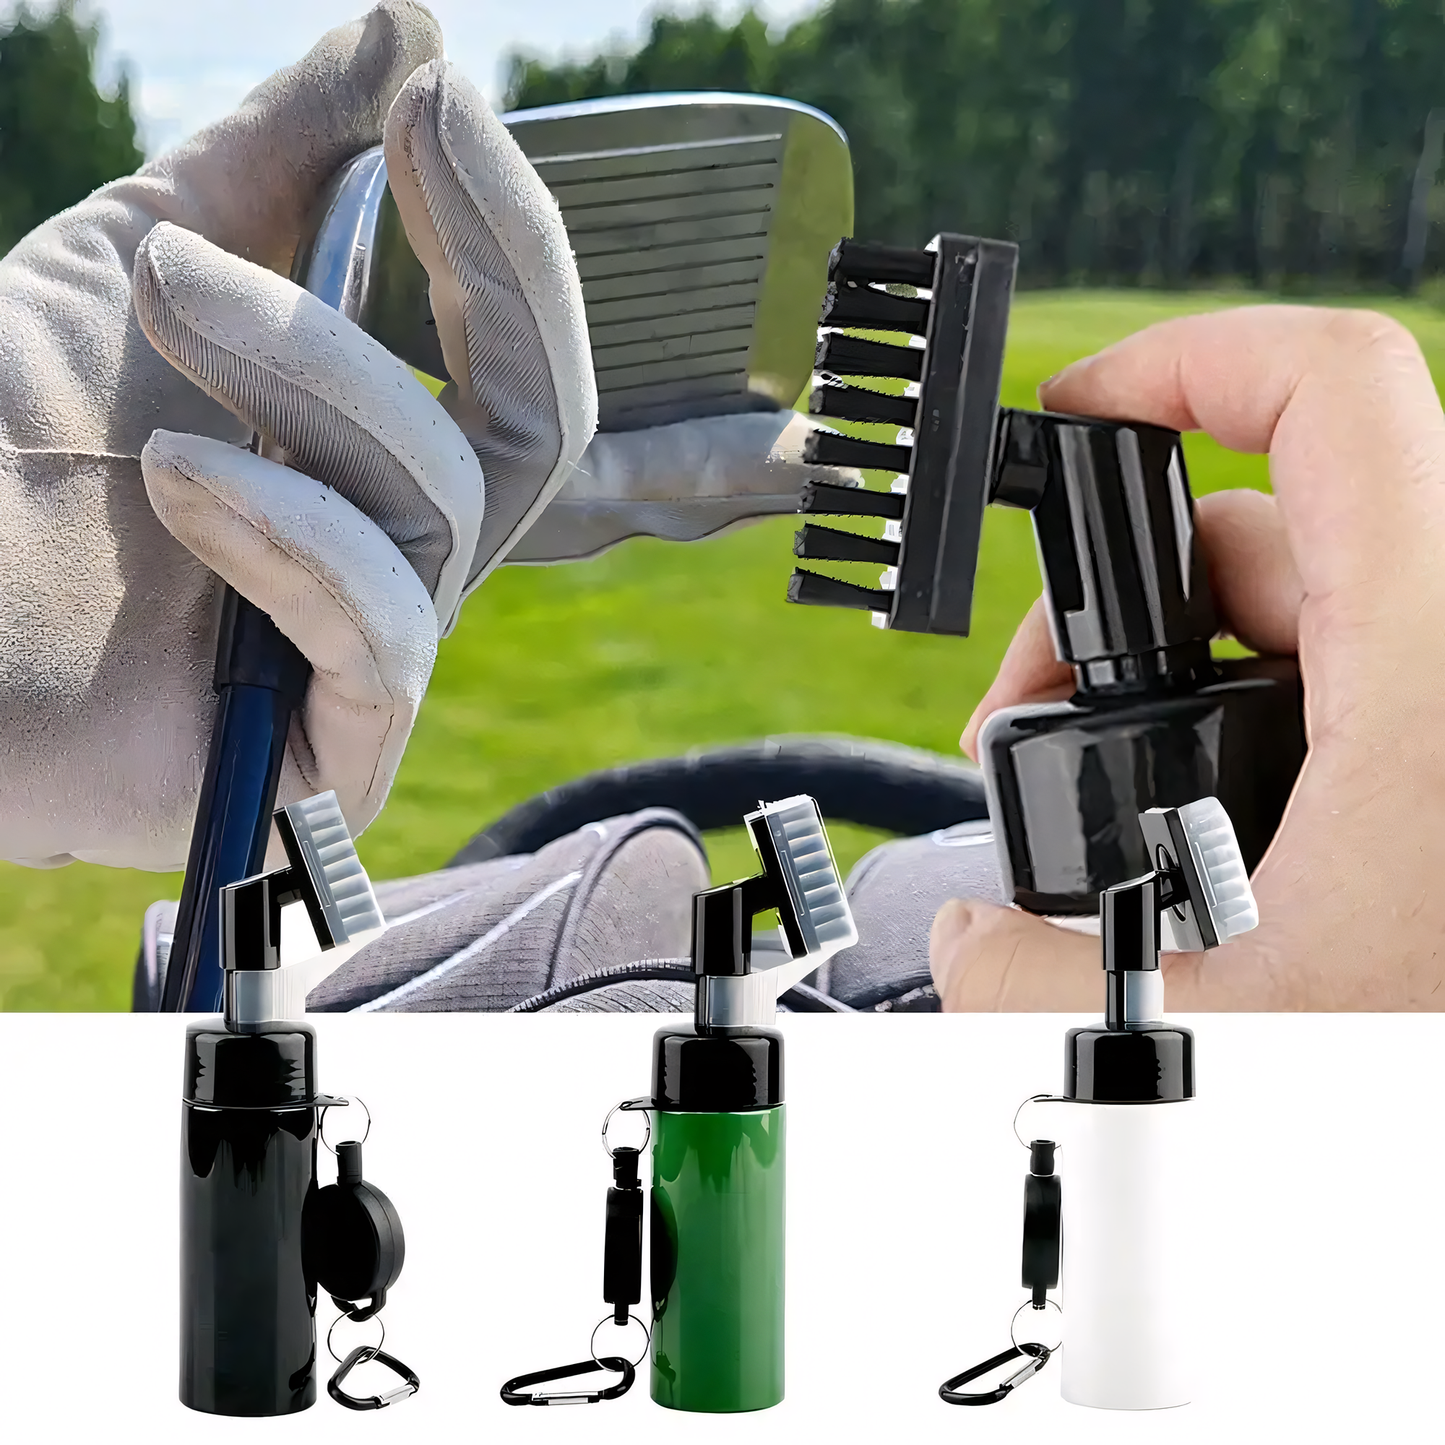 Etermist golf club brush with easy-attach feature securely clipped to golfer's bag outdoors.